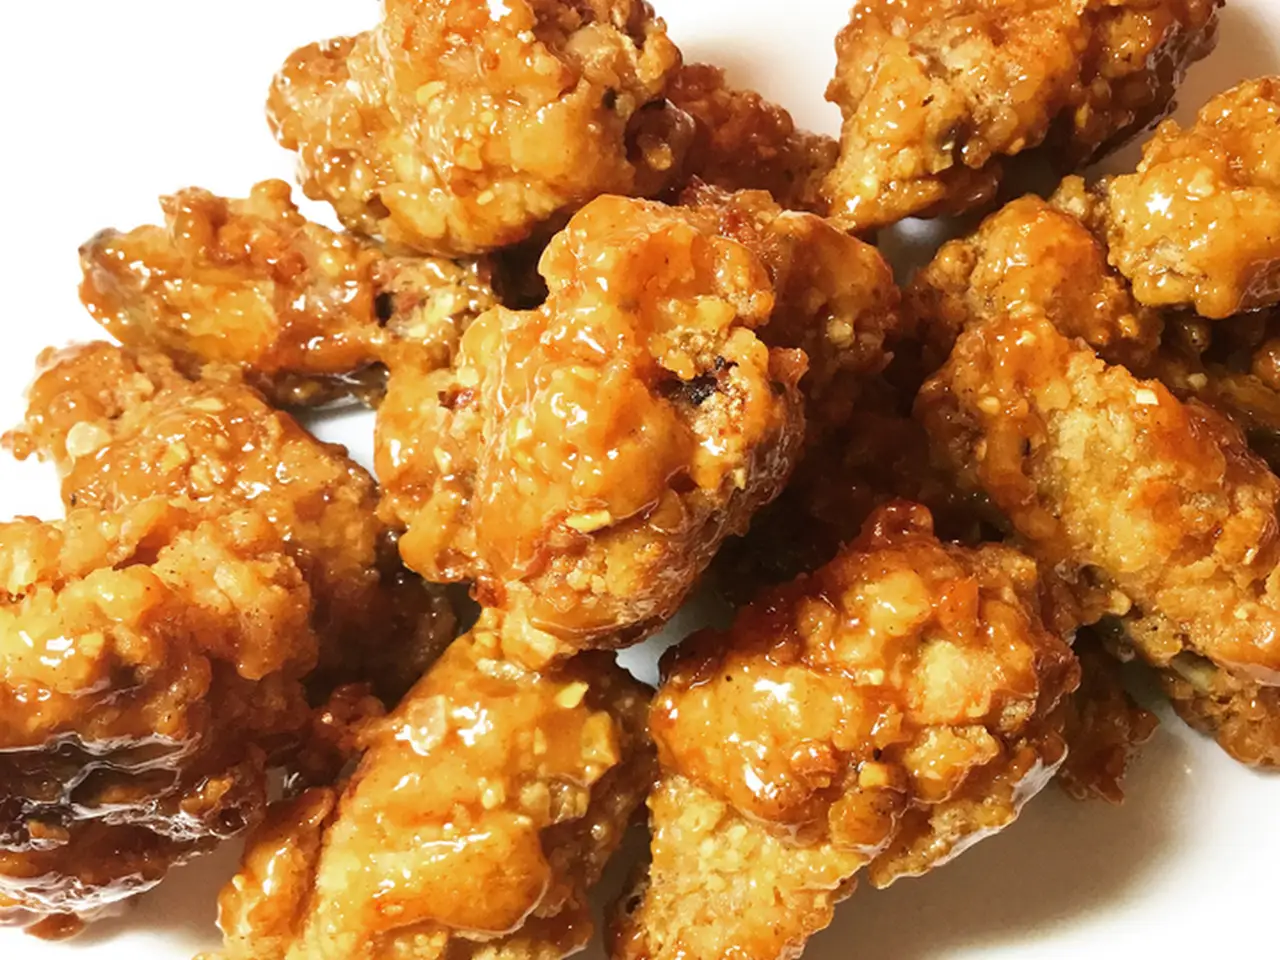 John's Fried Chicken Wings with Spicy Honey Butter Recipe